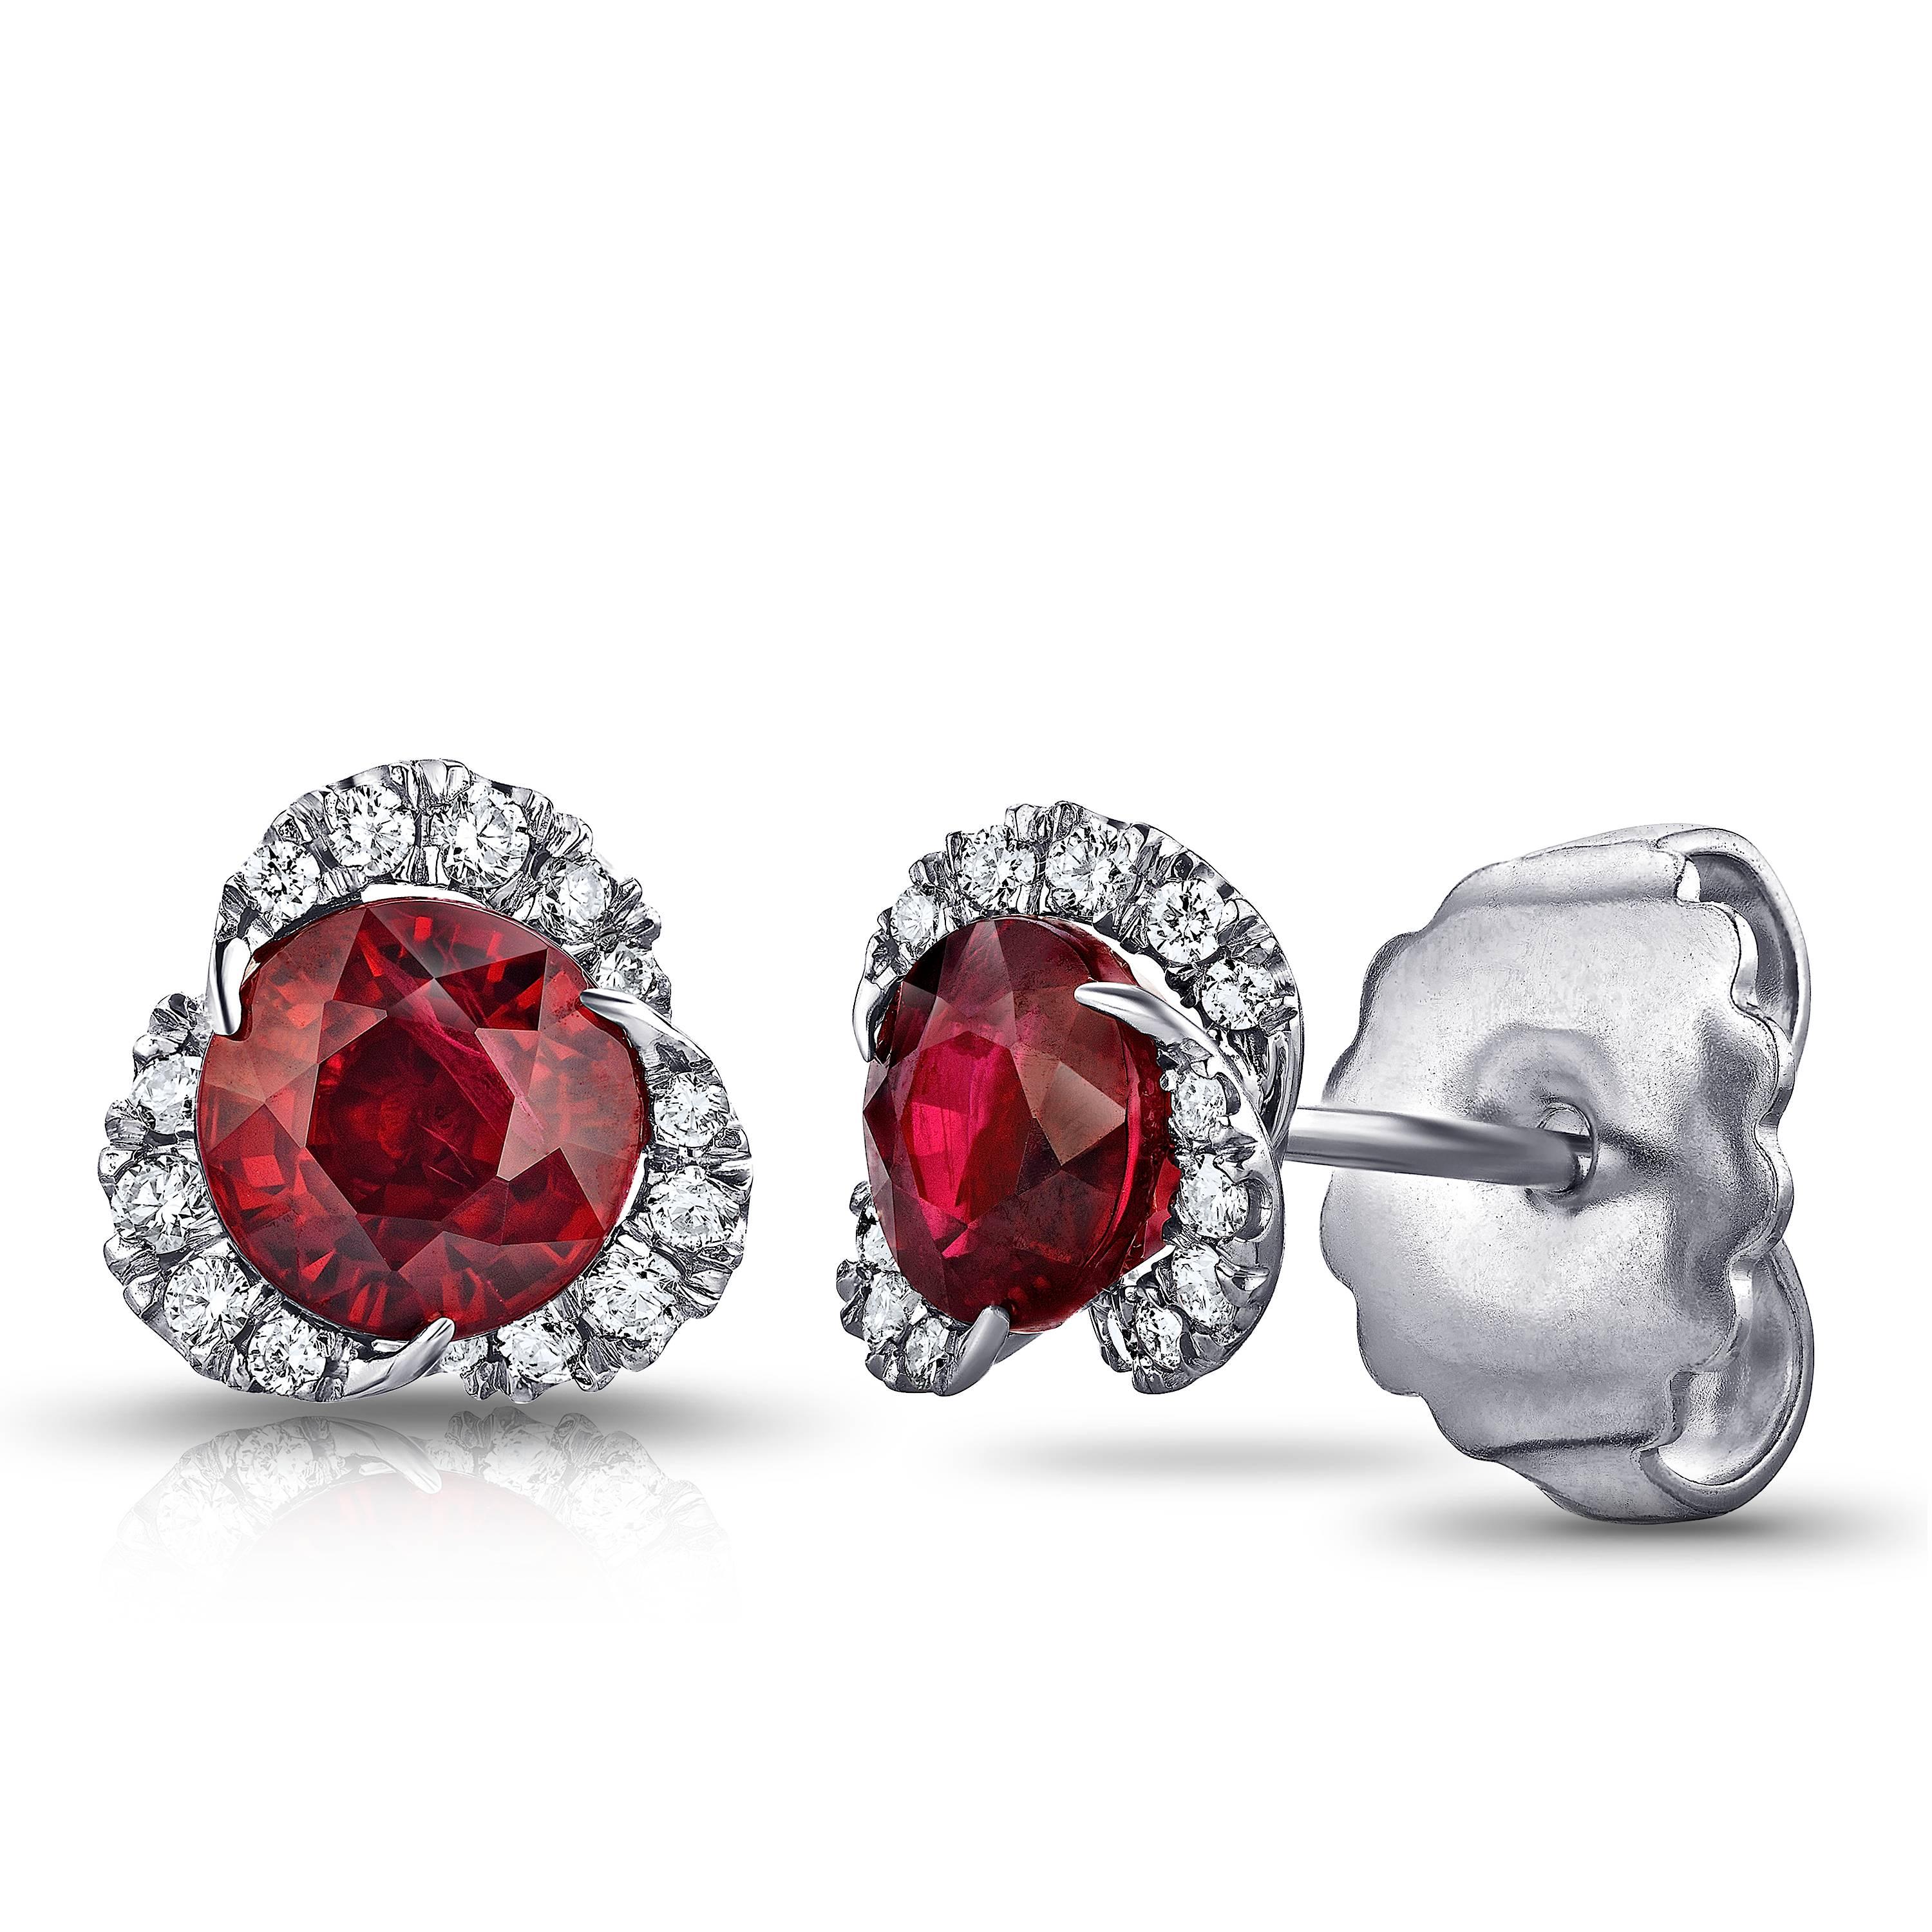 Two round  red rubies weighing 2.46 carats set with 30 round diamonds weighing .22 carats (F+ VVS/VS+). Set in hand made platinum. Only the finest quality stones and workmanship was used to create this impeccable  pair of earrings. The tops of these